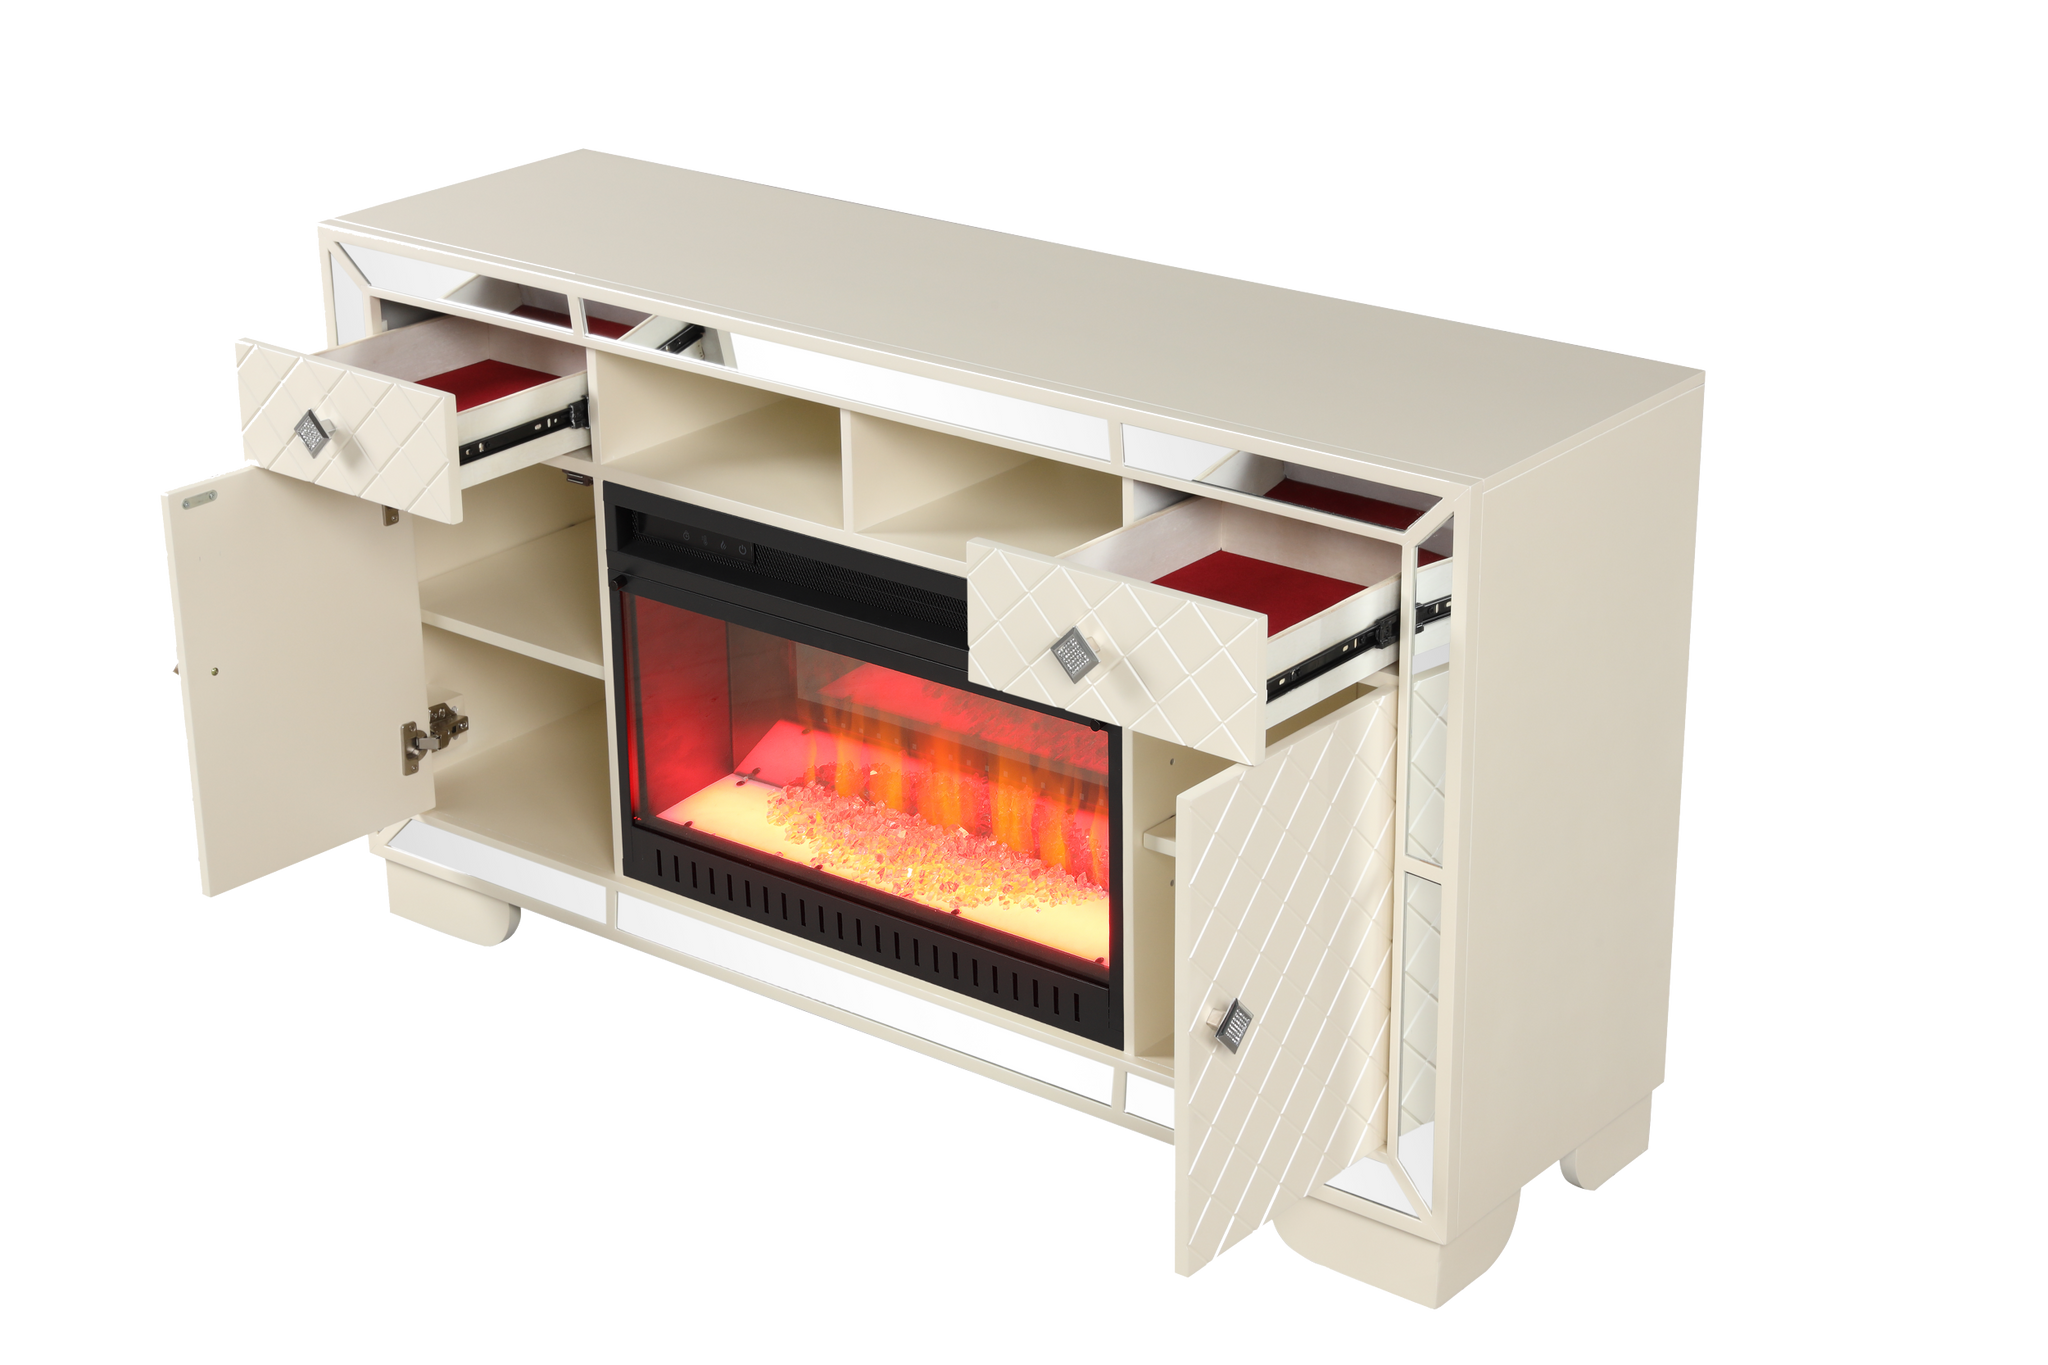 Madison TV Stand With Electric Fireplace in Beige electric-beige-primary living